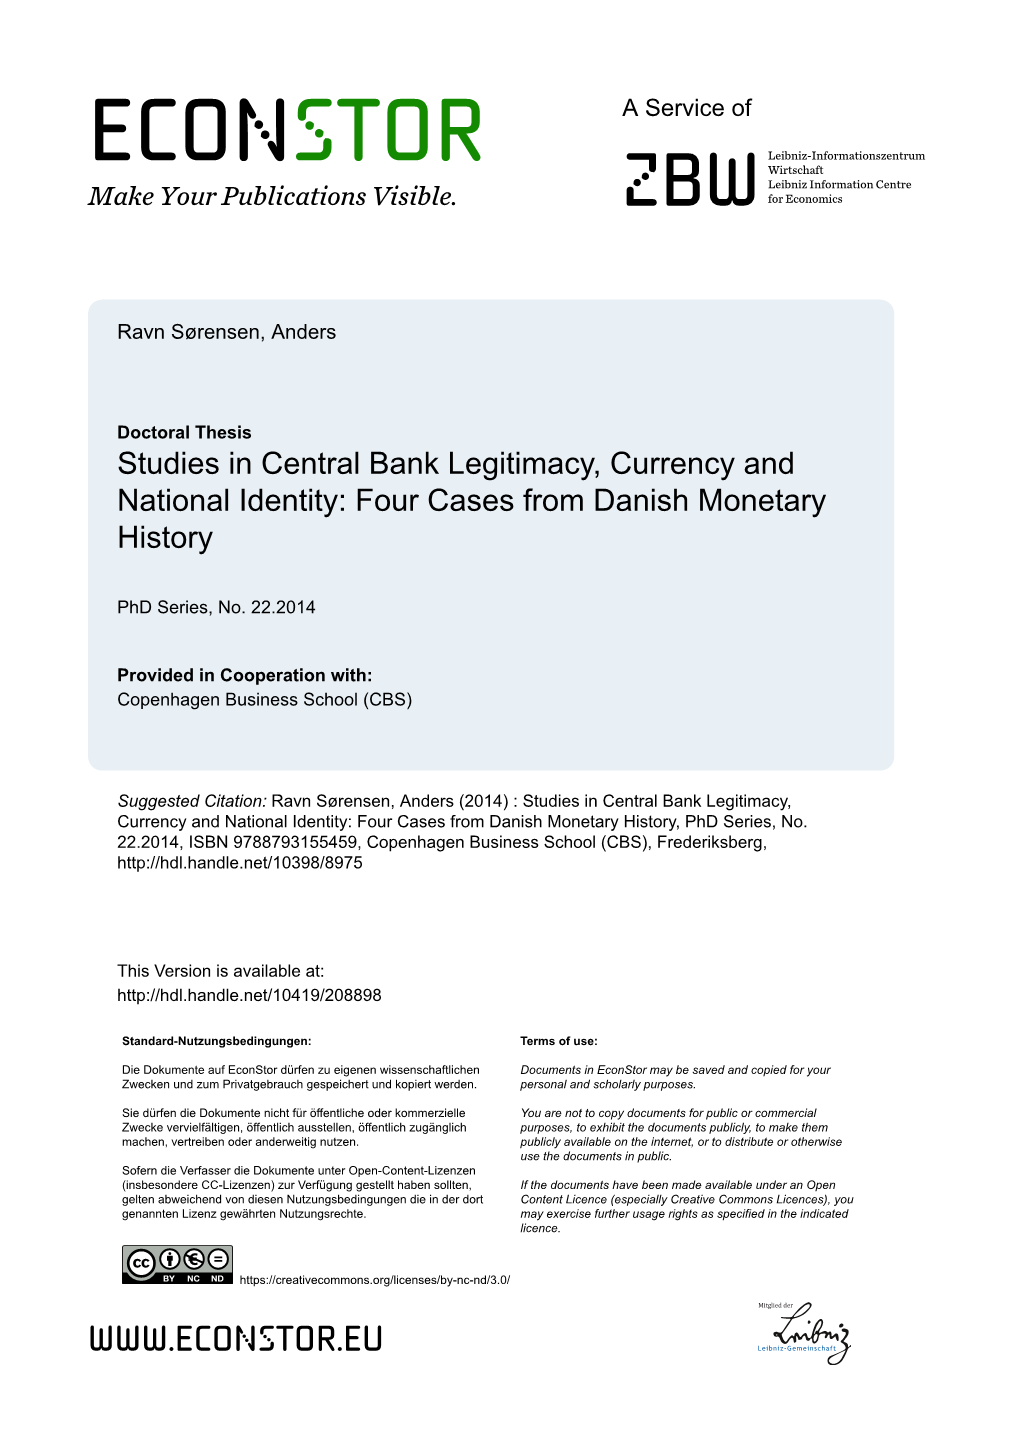 Studies in Central Bank Legitimacy, Currency and National Identity: Four Cases from Danish Monetary History